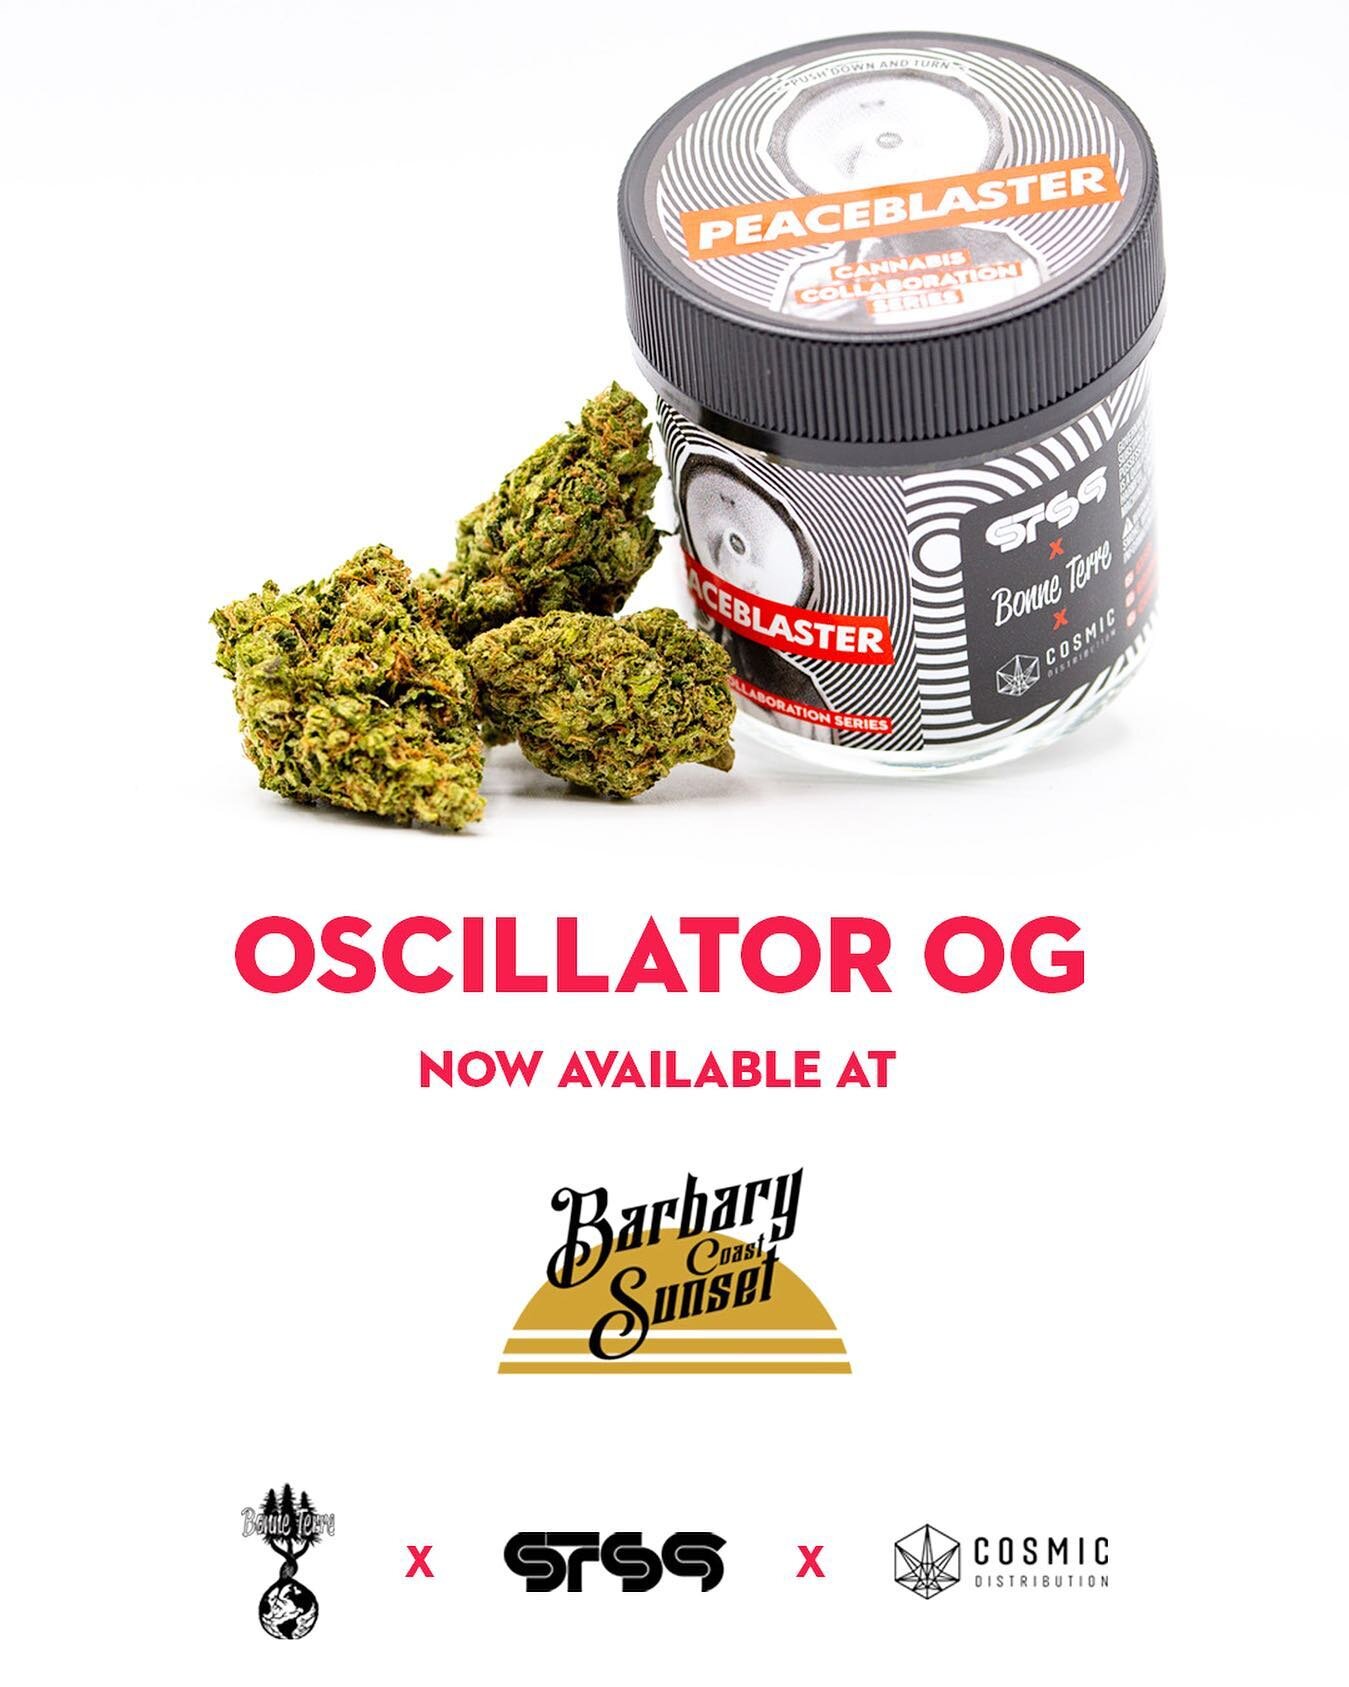 For everyone in the bay asking, you can now find our Oscillator OG in SF!! 
Shop drop @barbarysunset 💫😋💚
.
.
.
@sts9 
@cosmicdistribution 

Barbary Coast Sunset 
2161 Irving St., San Francisco

#bonneterre #farm #cannabis #sanfrancisco #sts9 
#cos